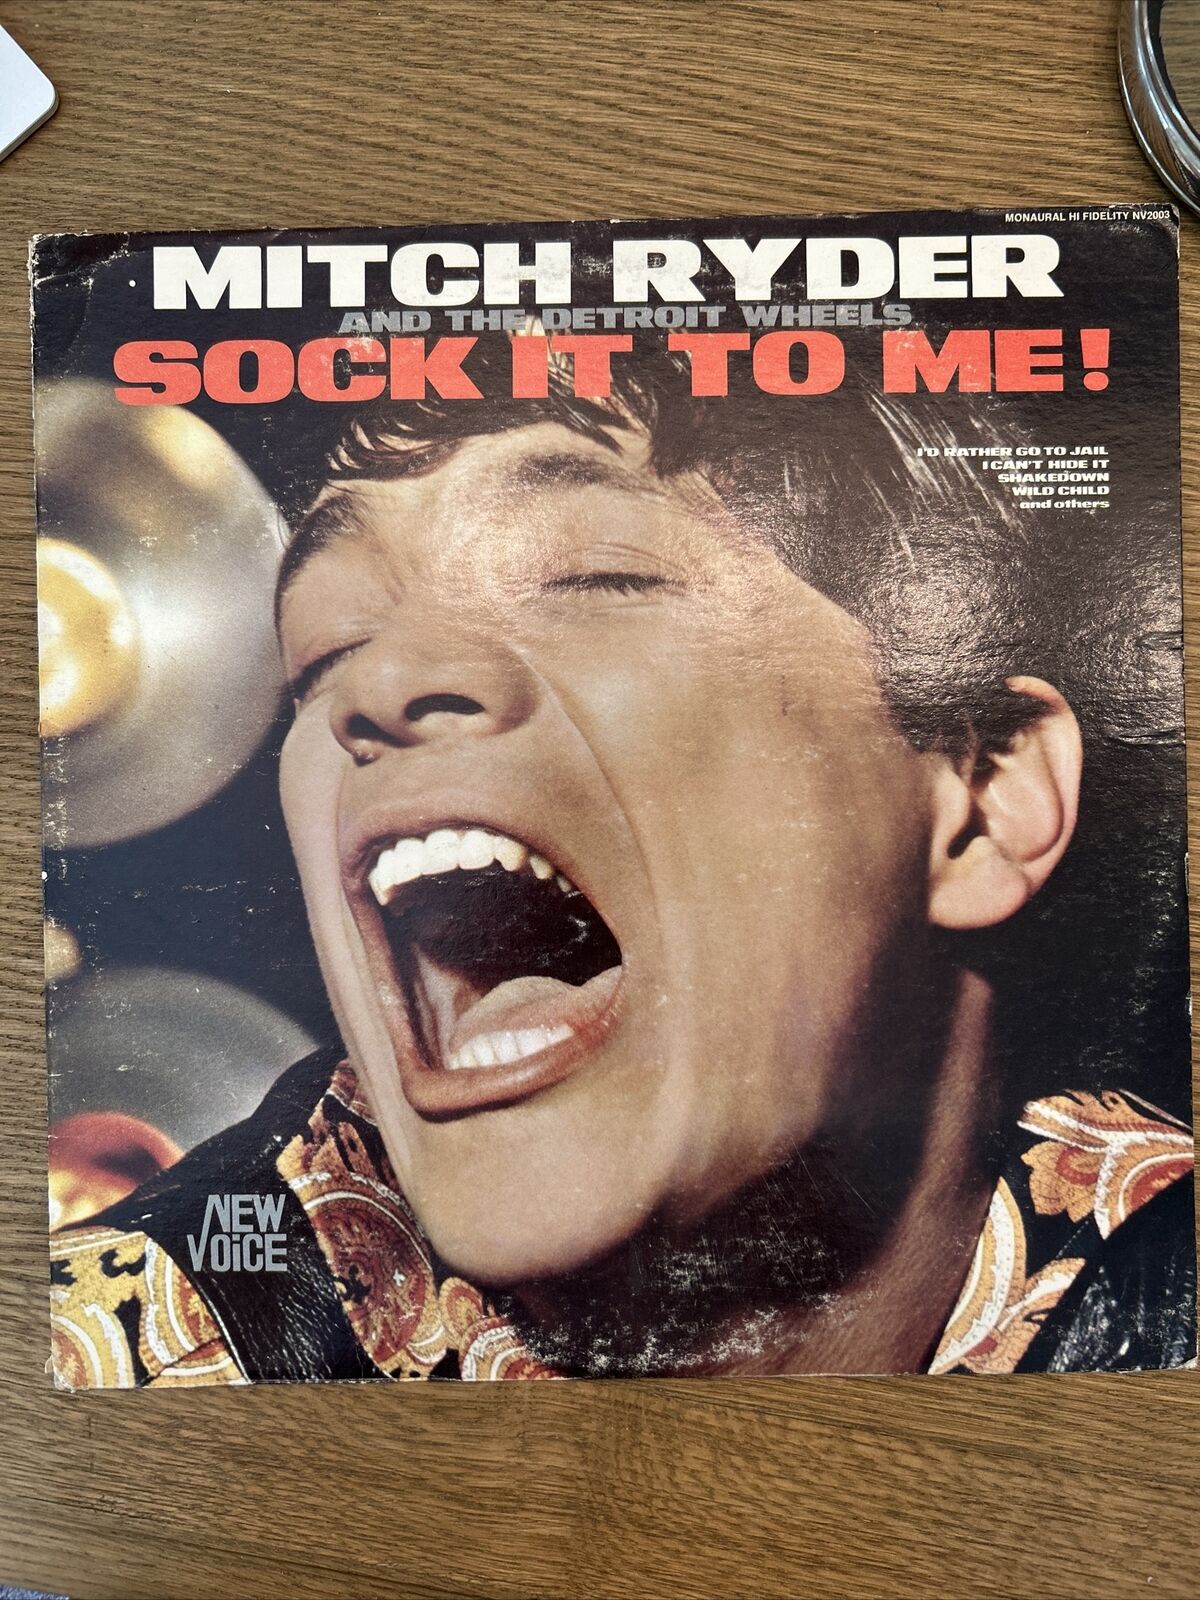 Mitch Ryder  The De - Sock It To Me! - Used Vinyl Record - NV2003 SALE $29